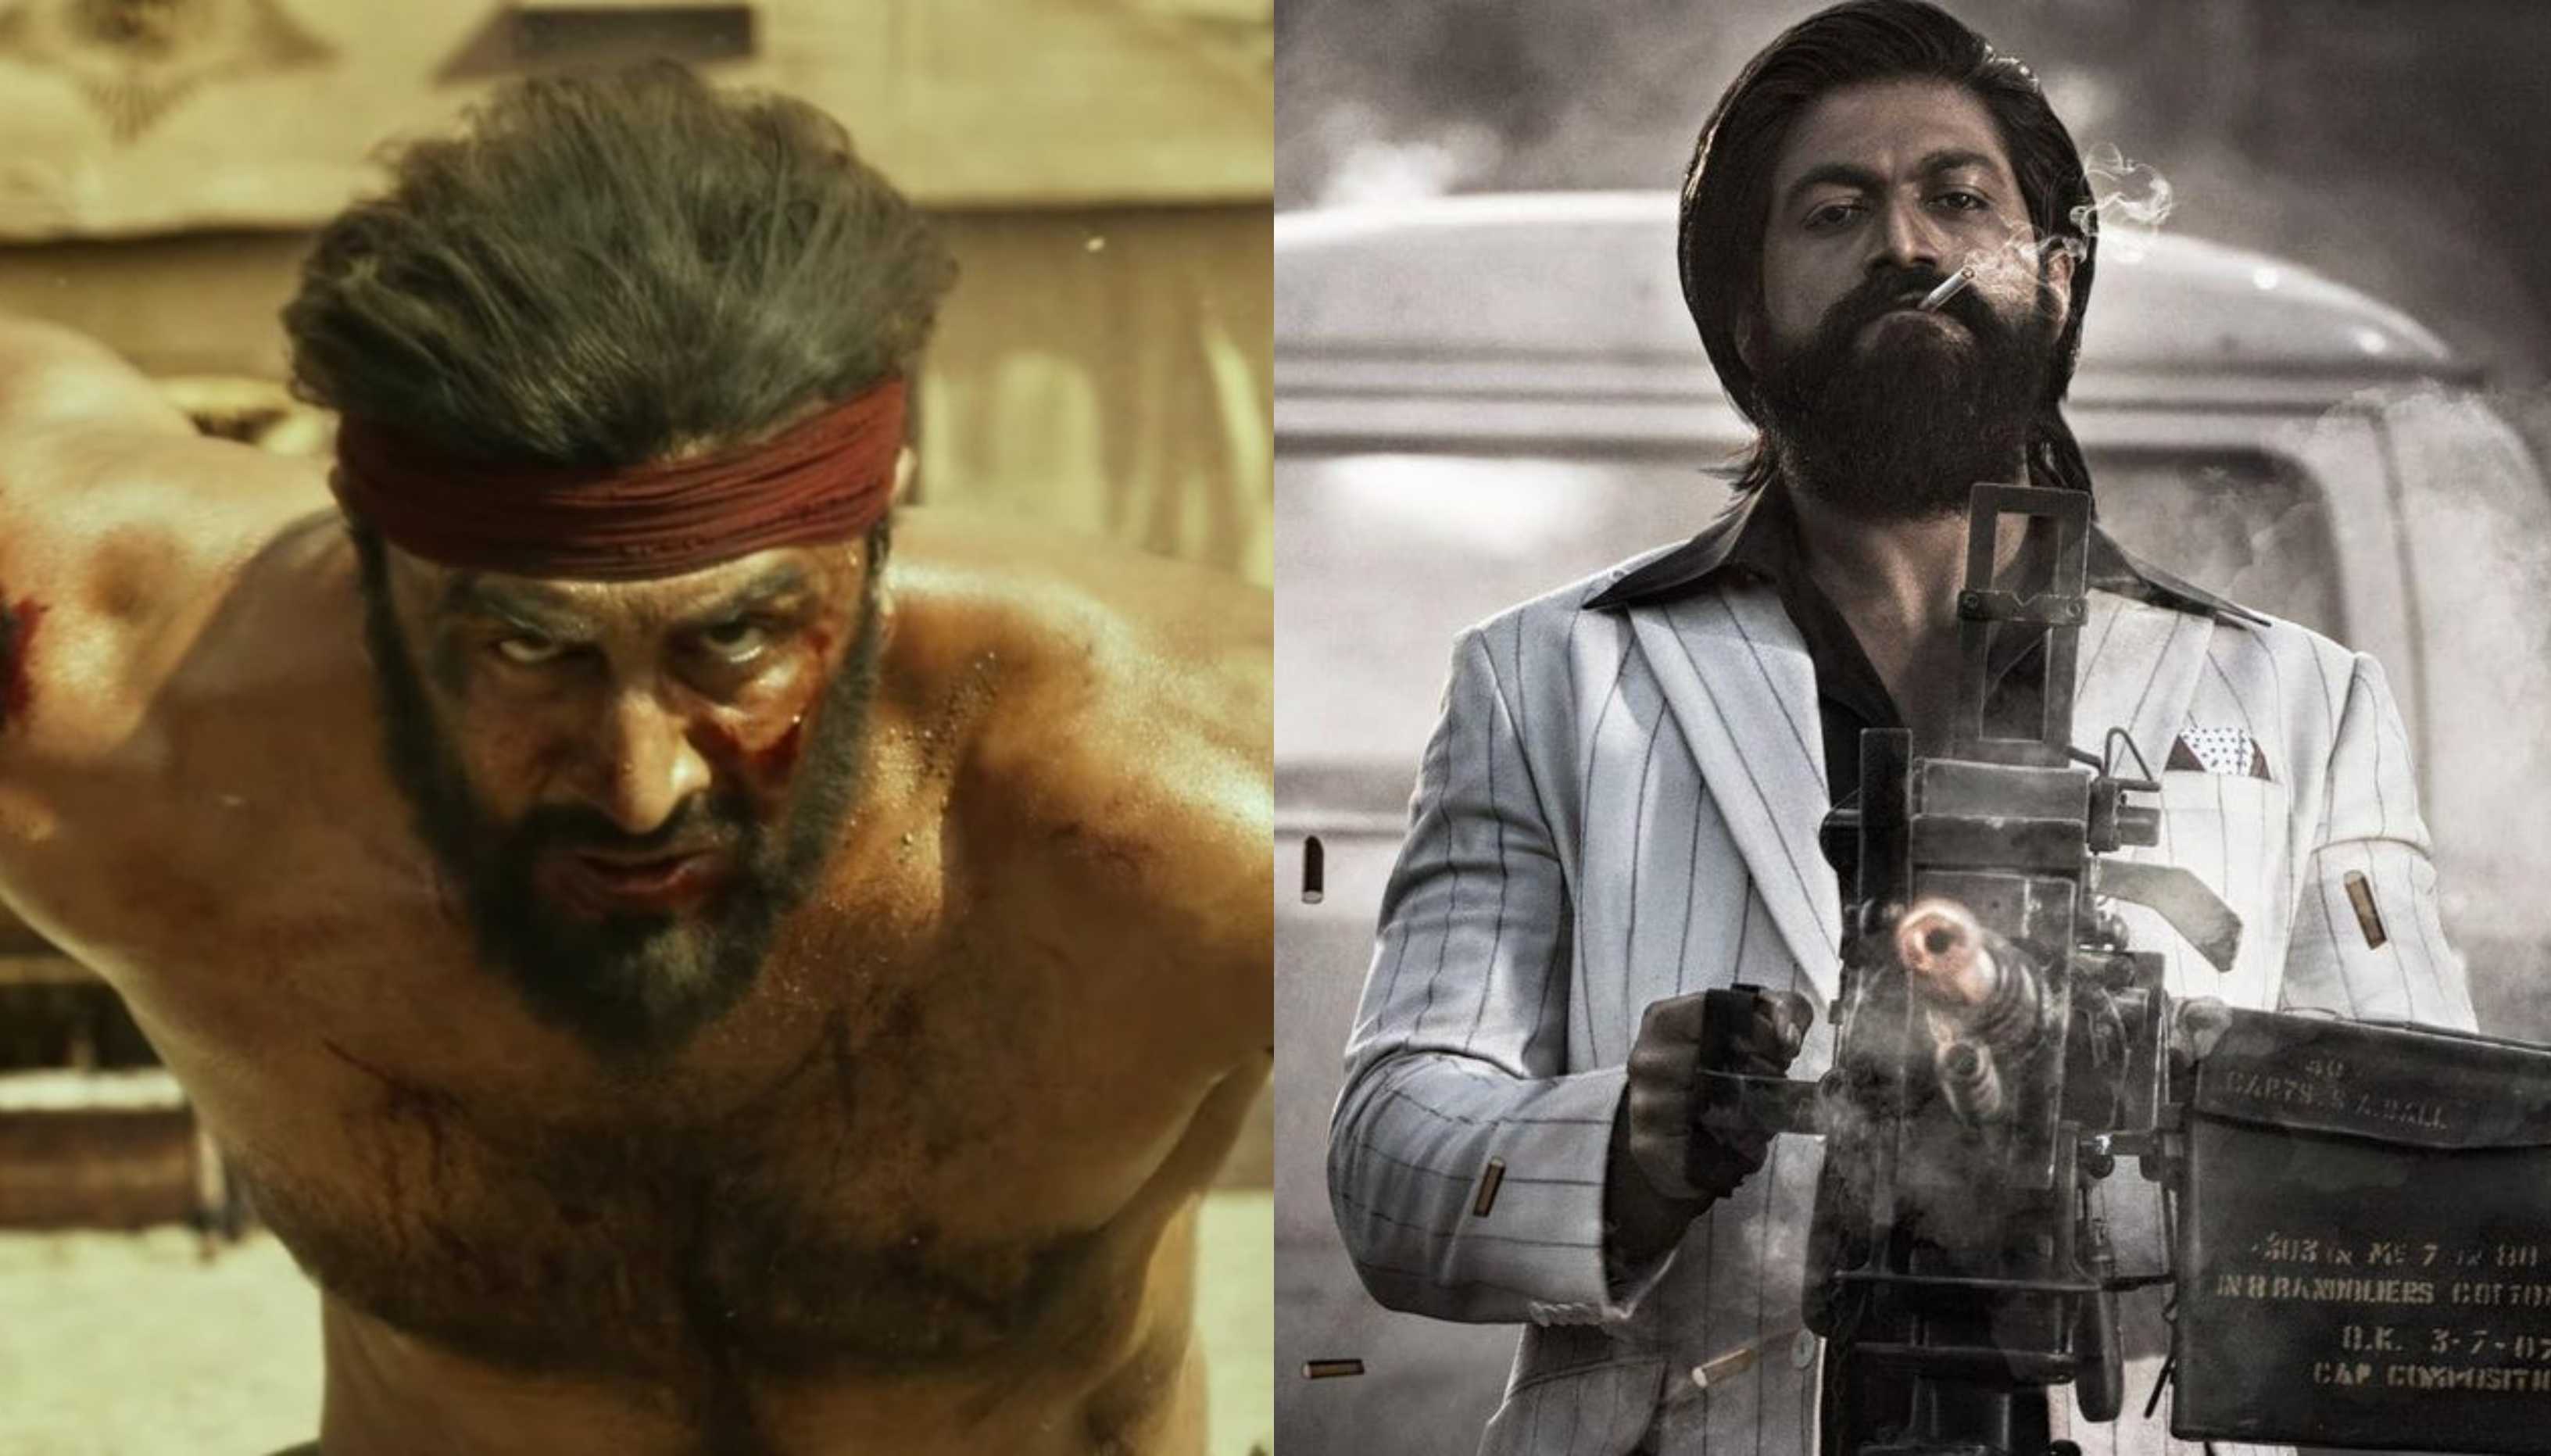 Exclusive: Shamshera director Karan Malhotra and Ranbir Kapoor react to comparisons with Game of Thrones, KGF